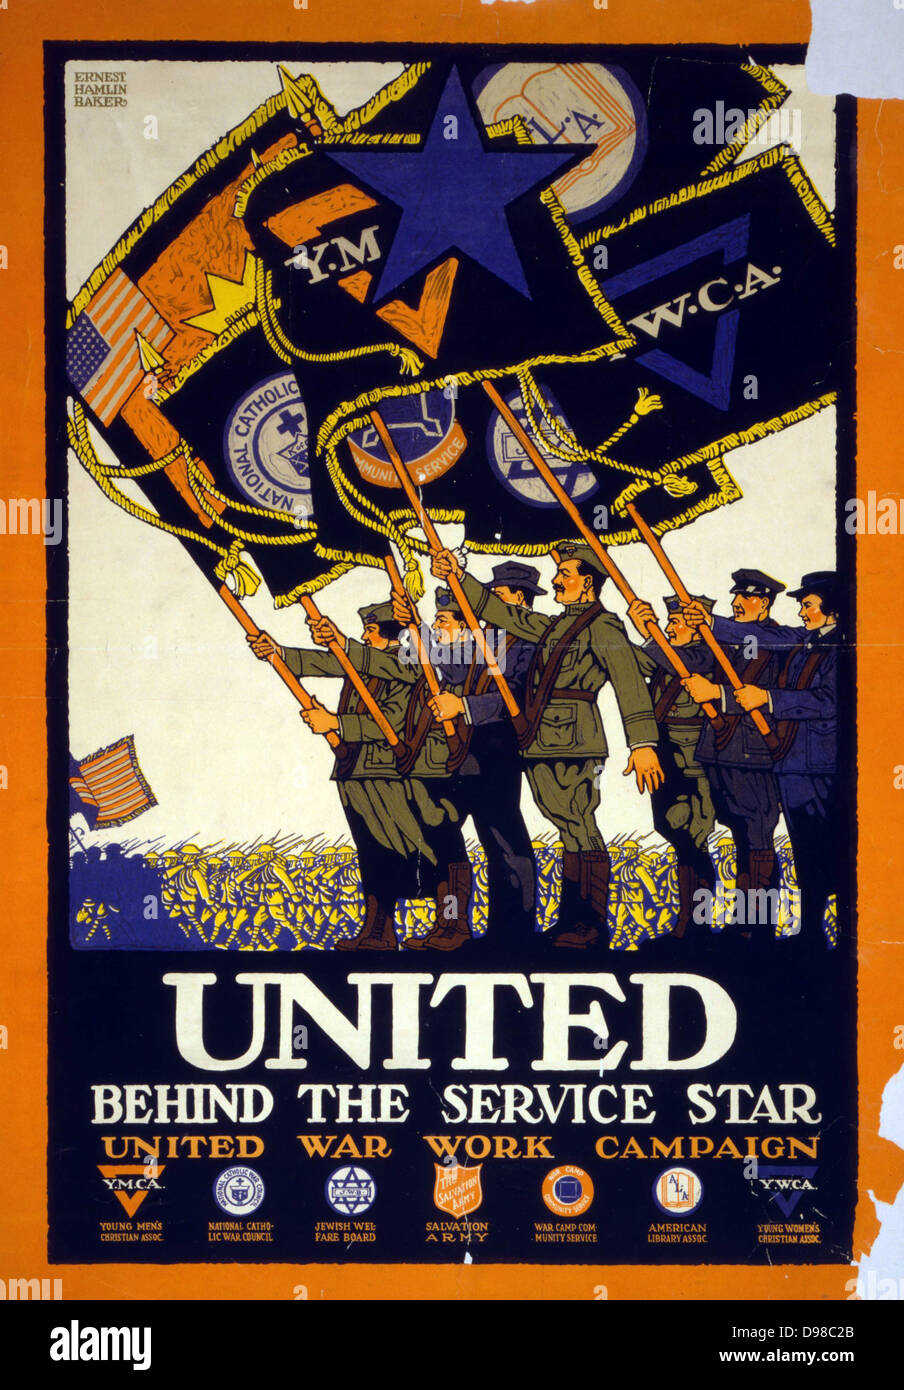 United behind the service star, United War Work Campaign. Baker, Ernest Hamlin, 1889-1975, artist. Published: 1918 Summary: Poster showing flags of various service organizations flying at a military parade. Stock Photo